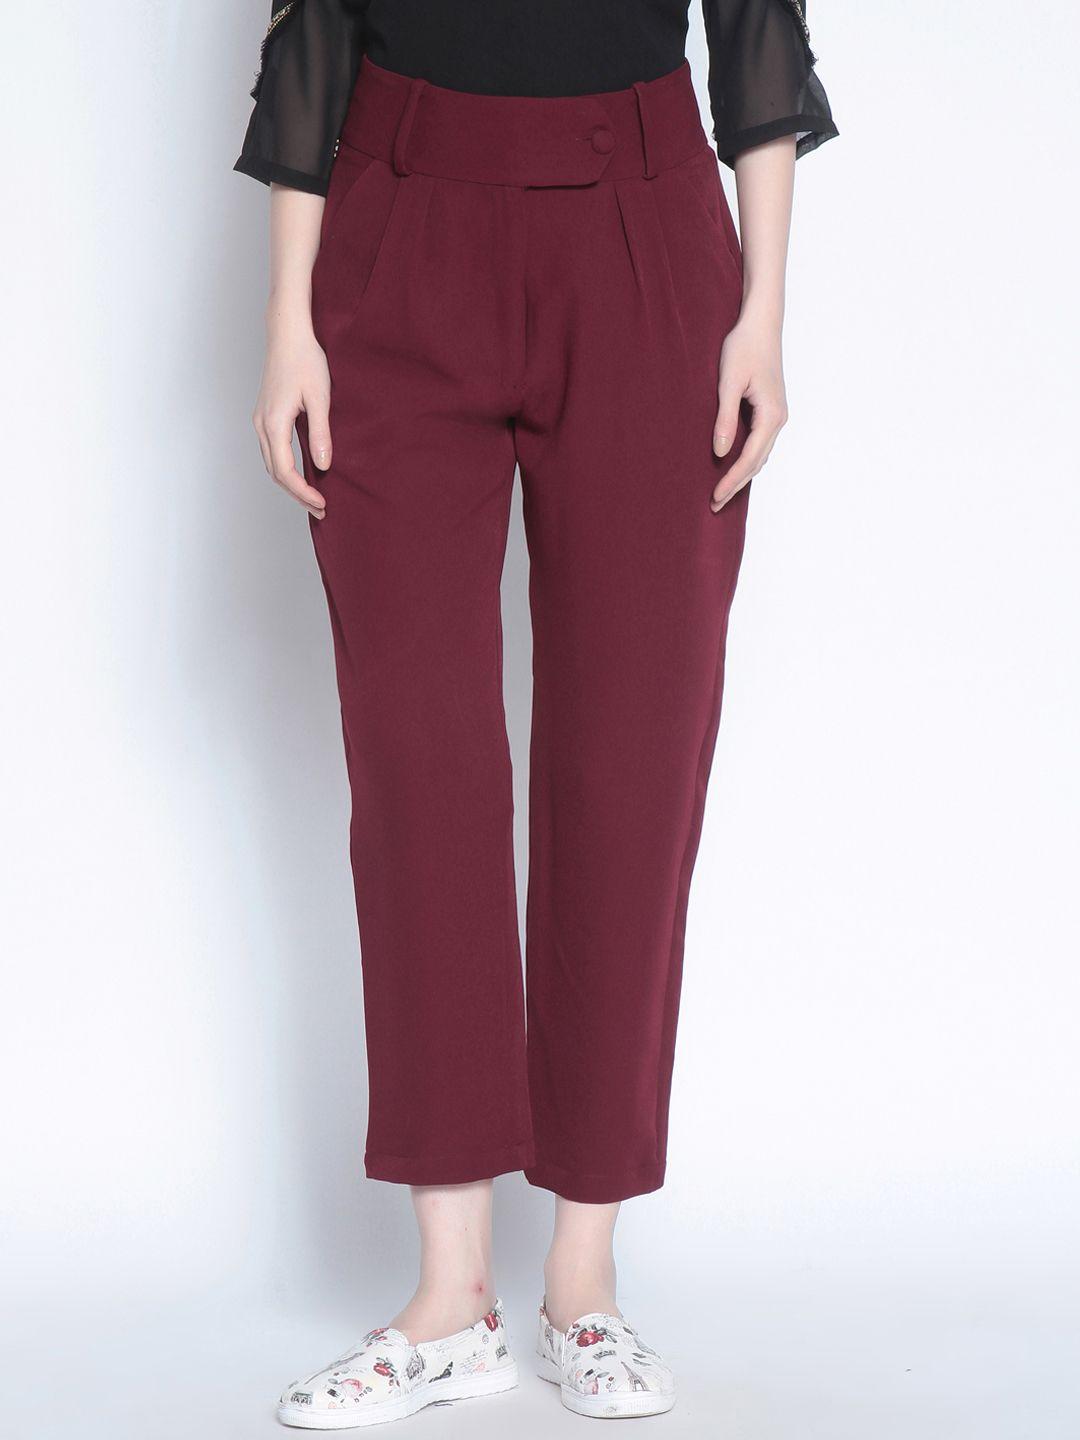 marie claire women burgundy smart regular fit solid formal trousers